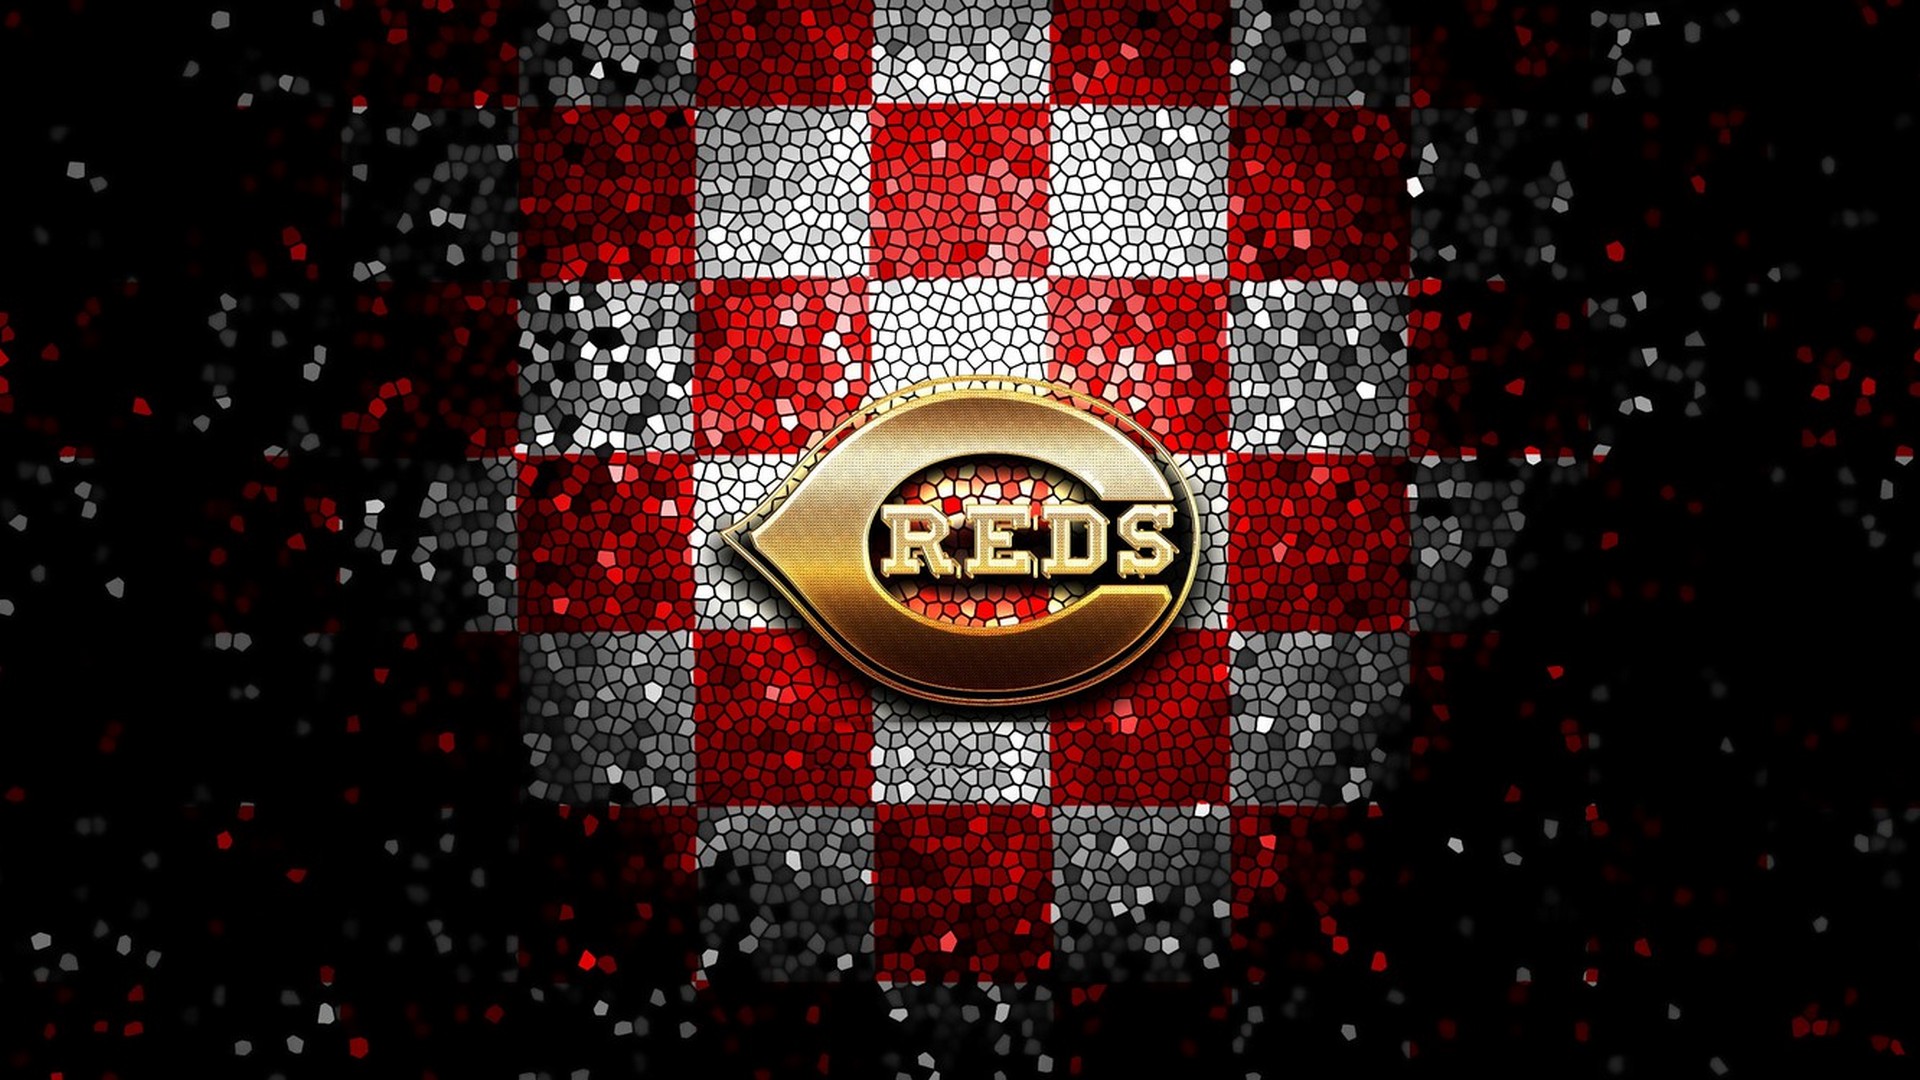 Cincinnati Reds MLB Wallpaper For Mac With high-resolution 1920X1080 pixel. You can use this wallpaper for Mac Desktop Wallpaper, Laptop Screensavers, Android Wallpapers, Tablet or iPhone Home Screen and another mobile phone device